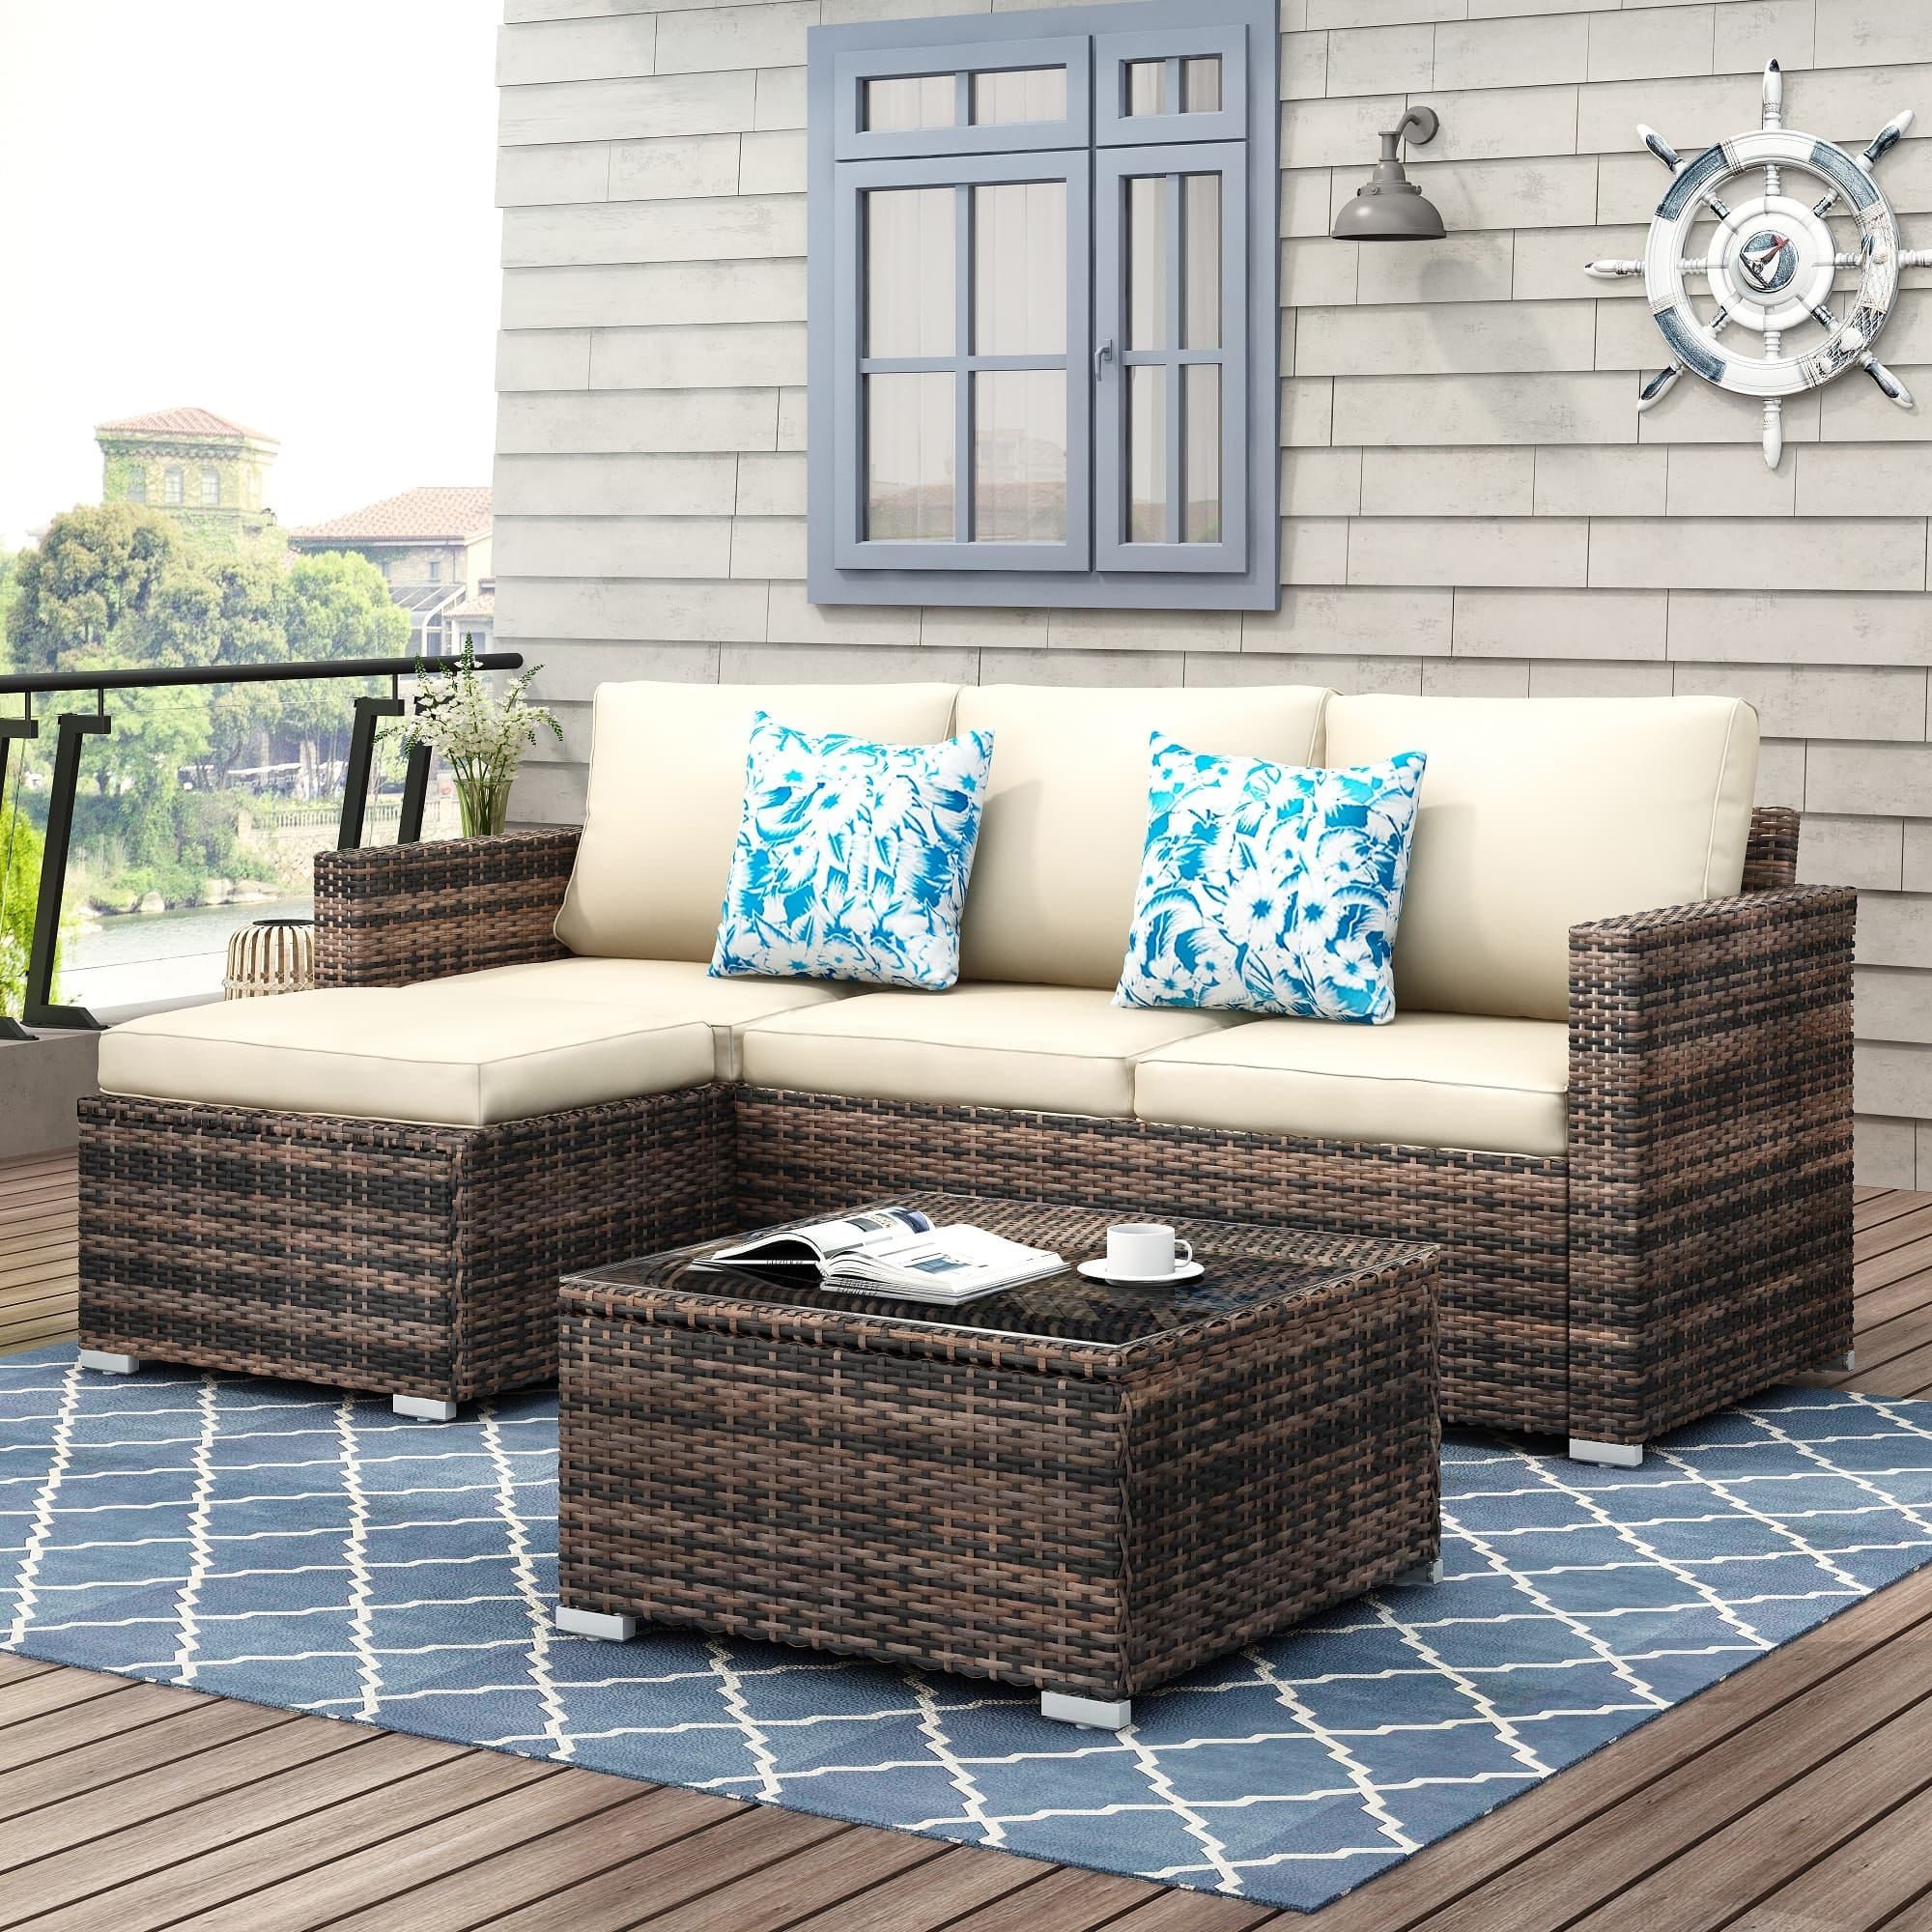 3 Piece Patio Furniture Sets Resin Wicker Outdoor Sectional Sofa Chat Set –  On Sale – – 31721010 Inside Outdoor Wicker 3 Piece Set (Photo 15 of 15)